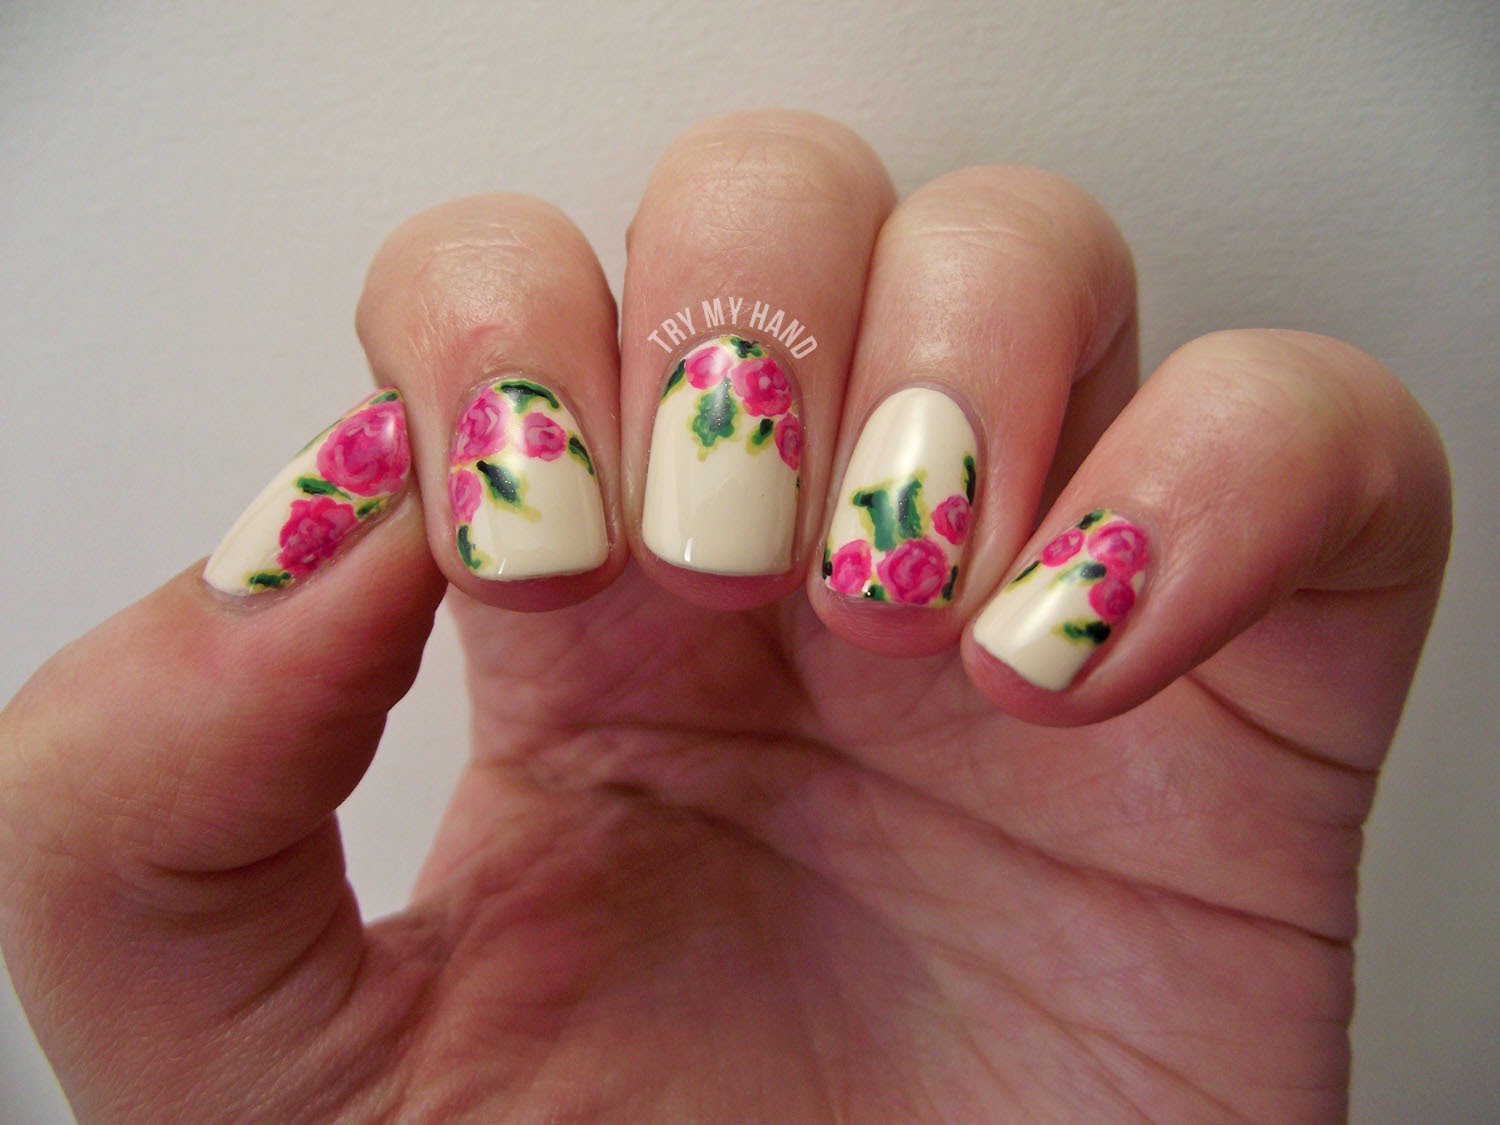 7. Step by Step Instructions for Floral Nail Art - wide 5